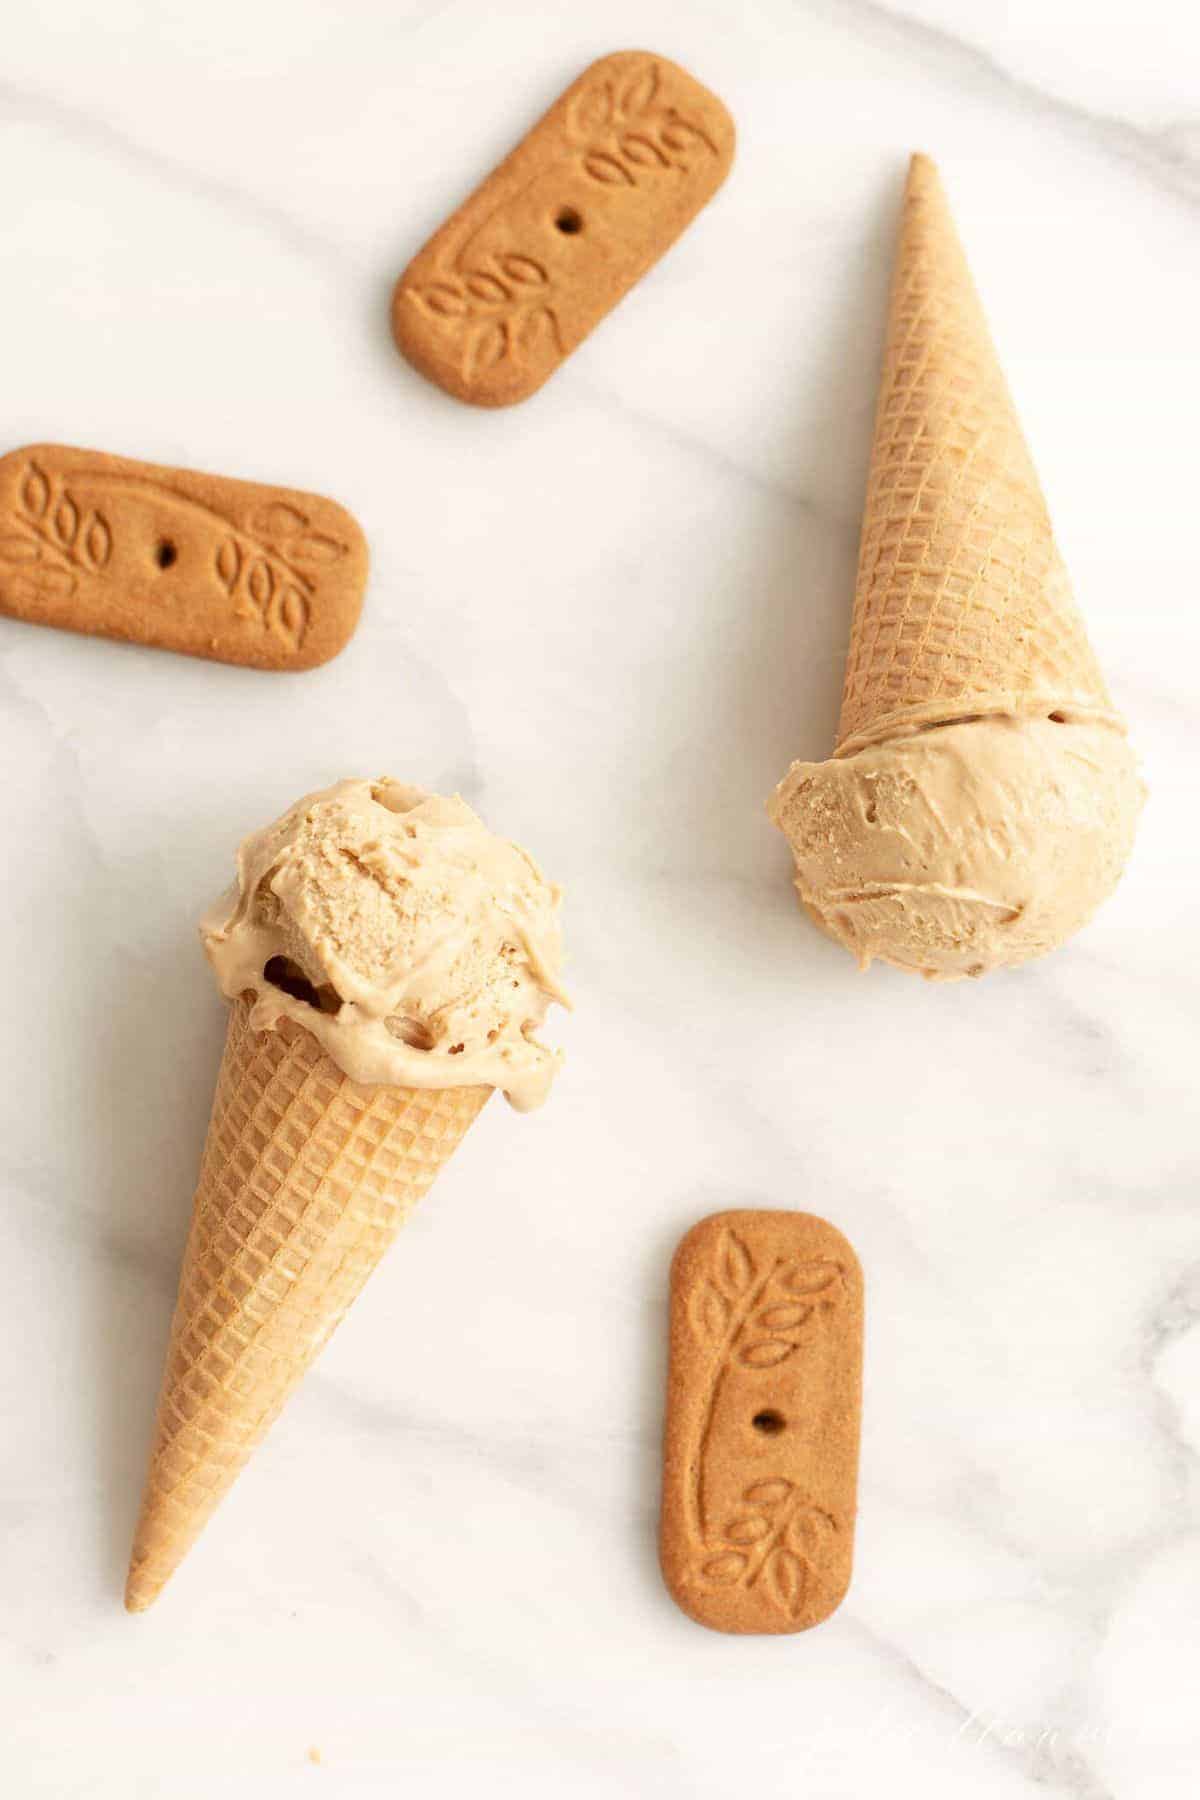 Waffle ice cream cones on a marble surface, filled with homemade speculoos ice cream. #cookiebuttericecream